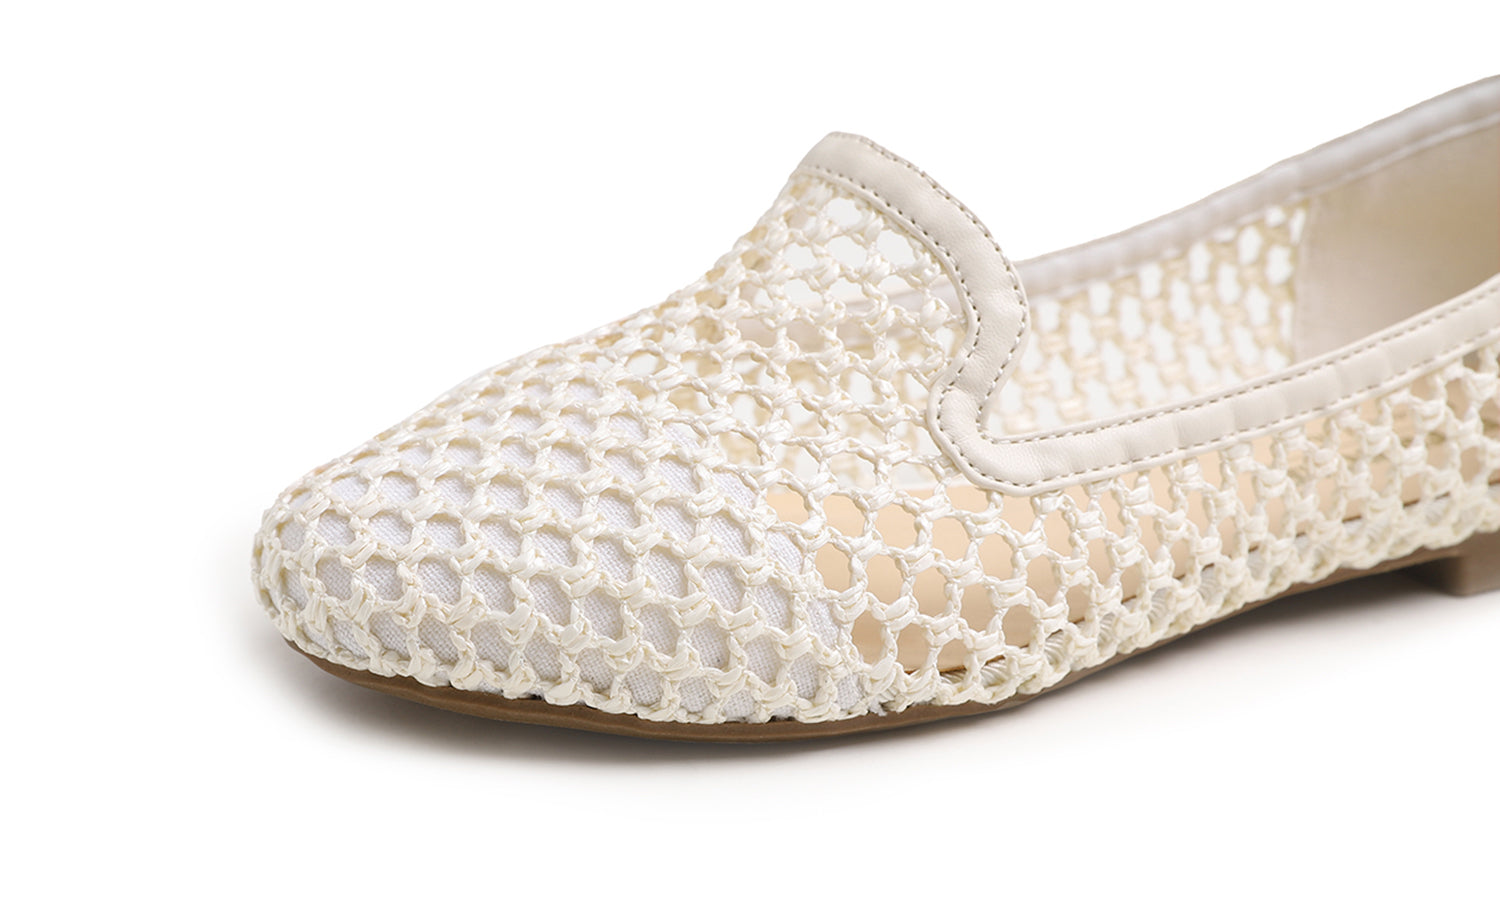 Feversole Women's Woven Fashion Breathable Knit Flat Shoes Cream White Mesh Loafer